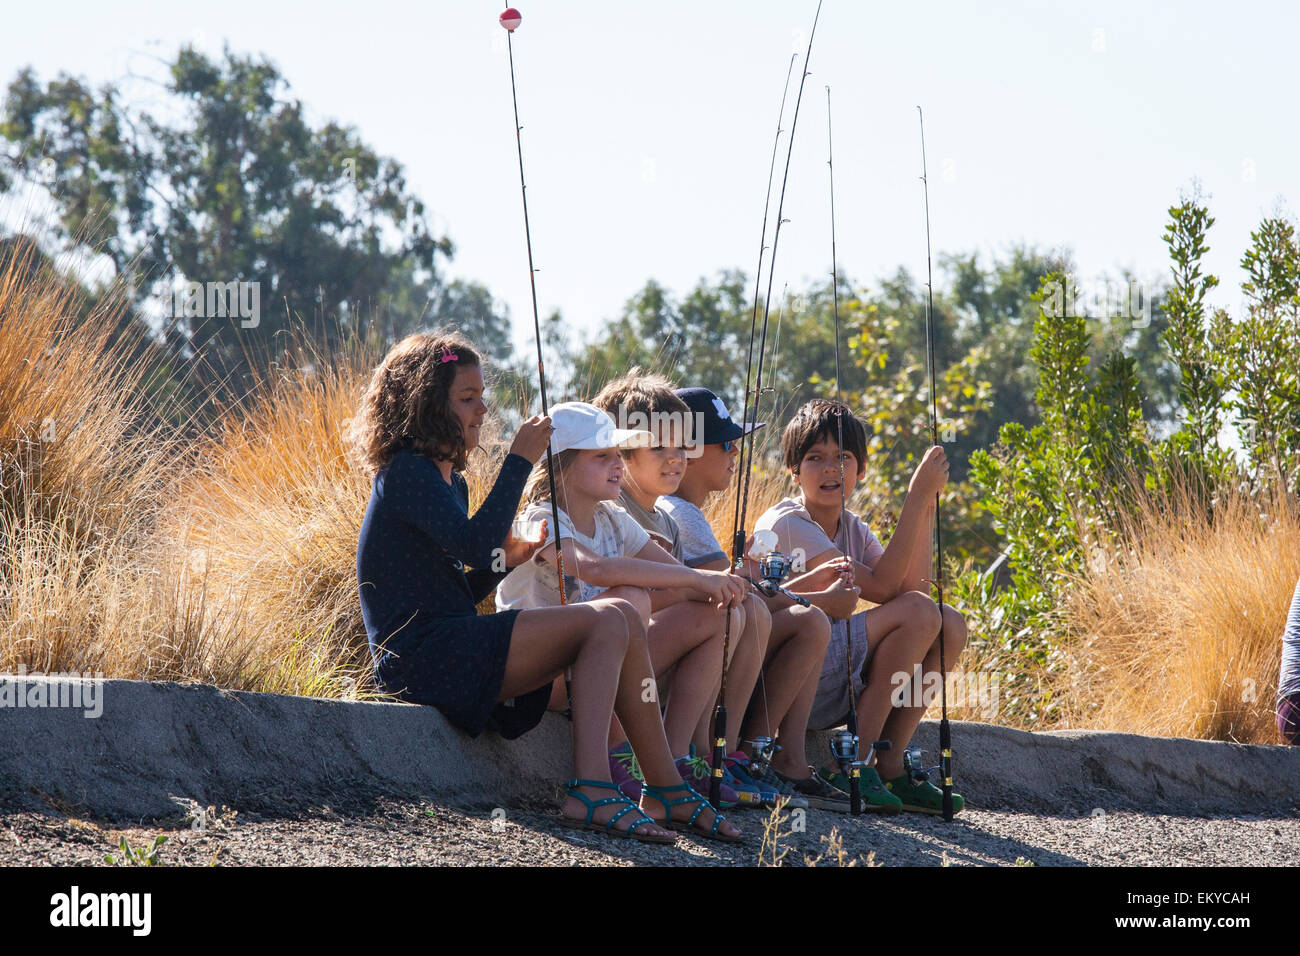 Kids and those wishing to learn to fish attend The first annual Off tha’ Hook fly fishing event, Los Angeles River Stock Photo